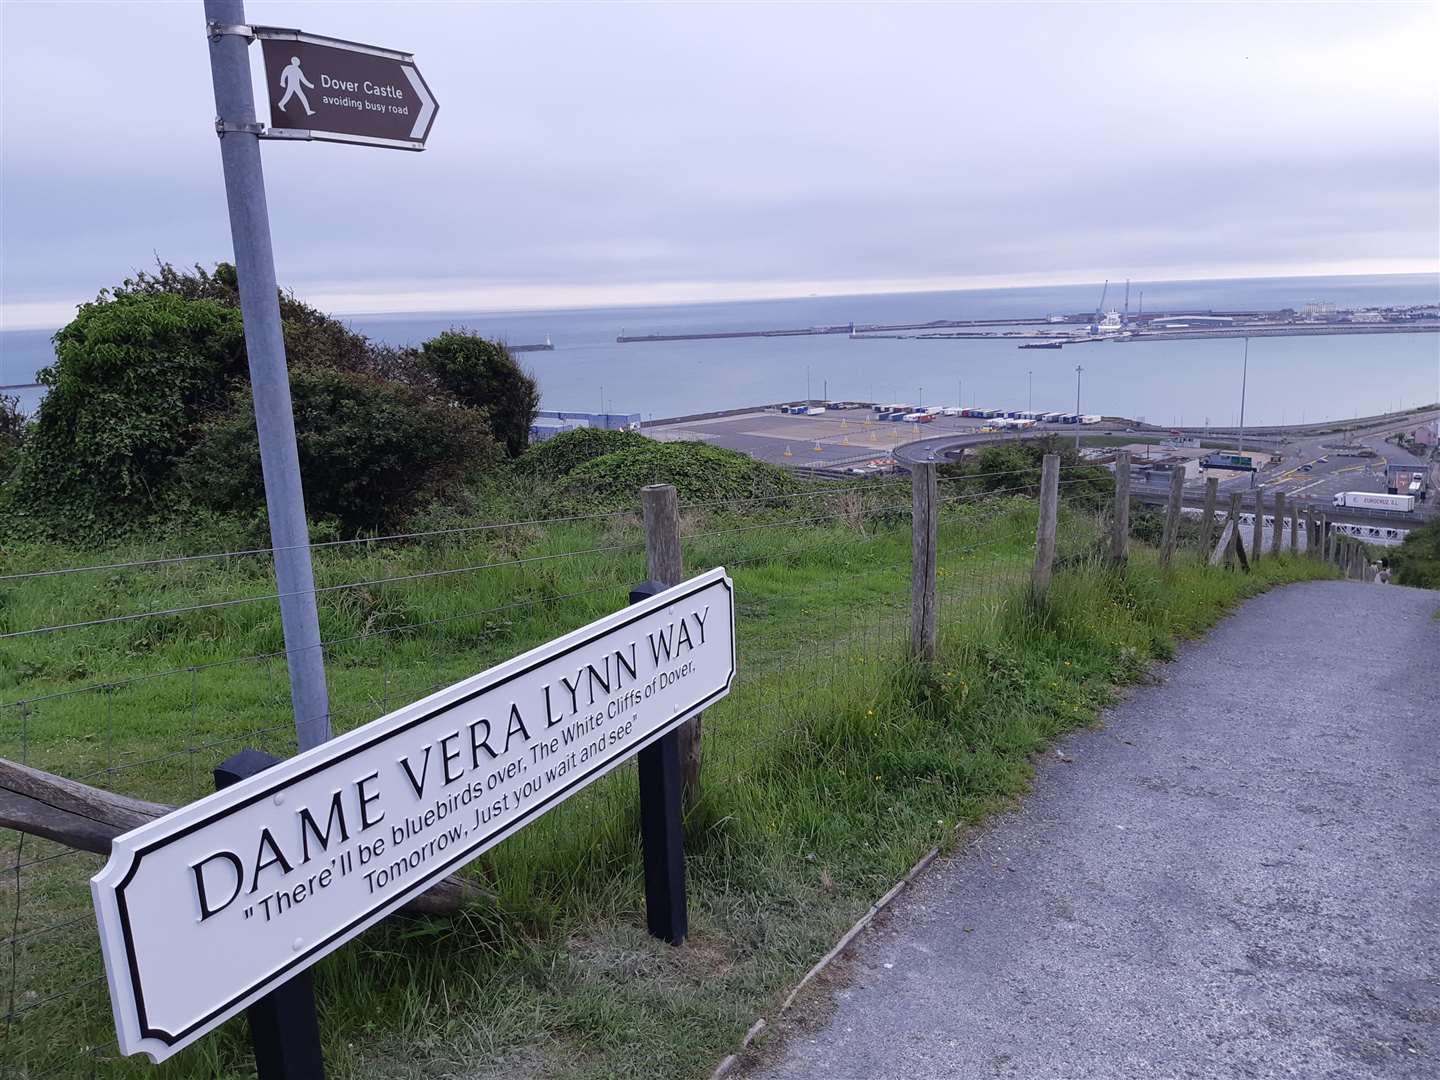 The top of the White Cliffs footpath named after Dame Vera Lynn Picture: Sam Lennon